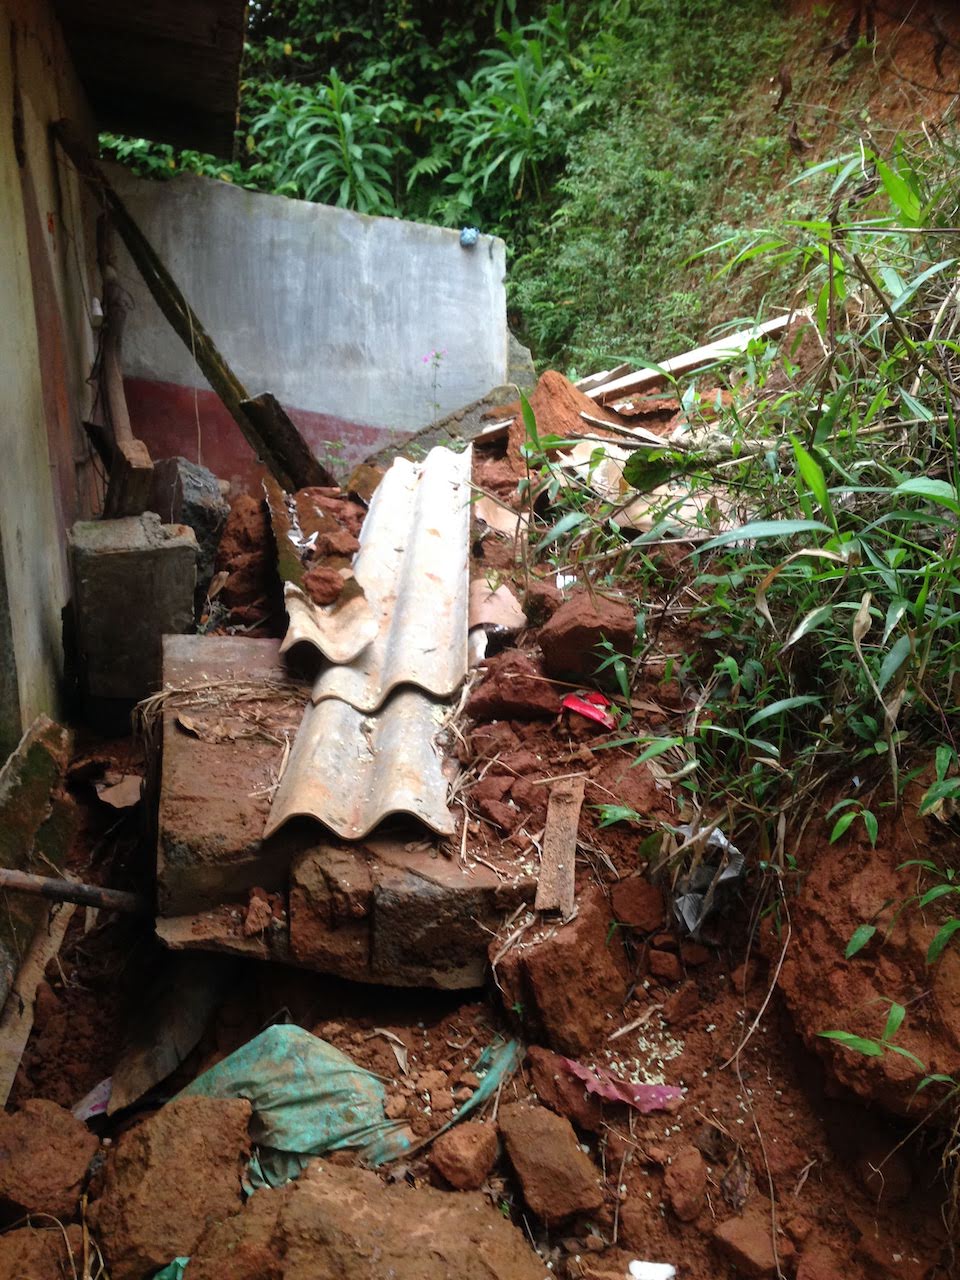 The bathroom collapsed from the impact of the loosened soil. Photo courtesy of SaveAGram